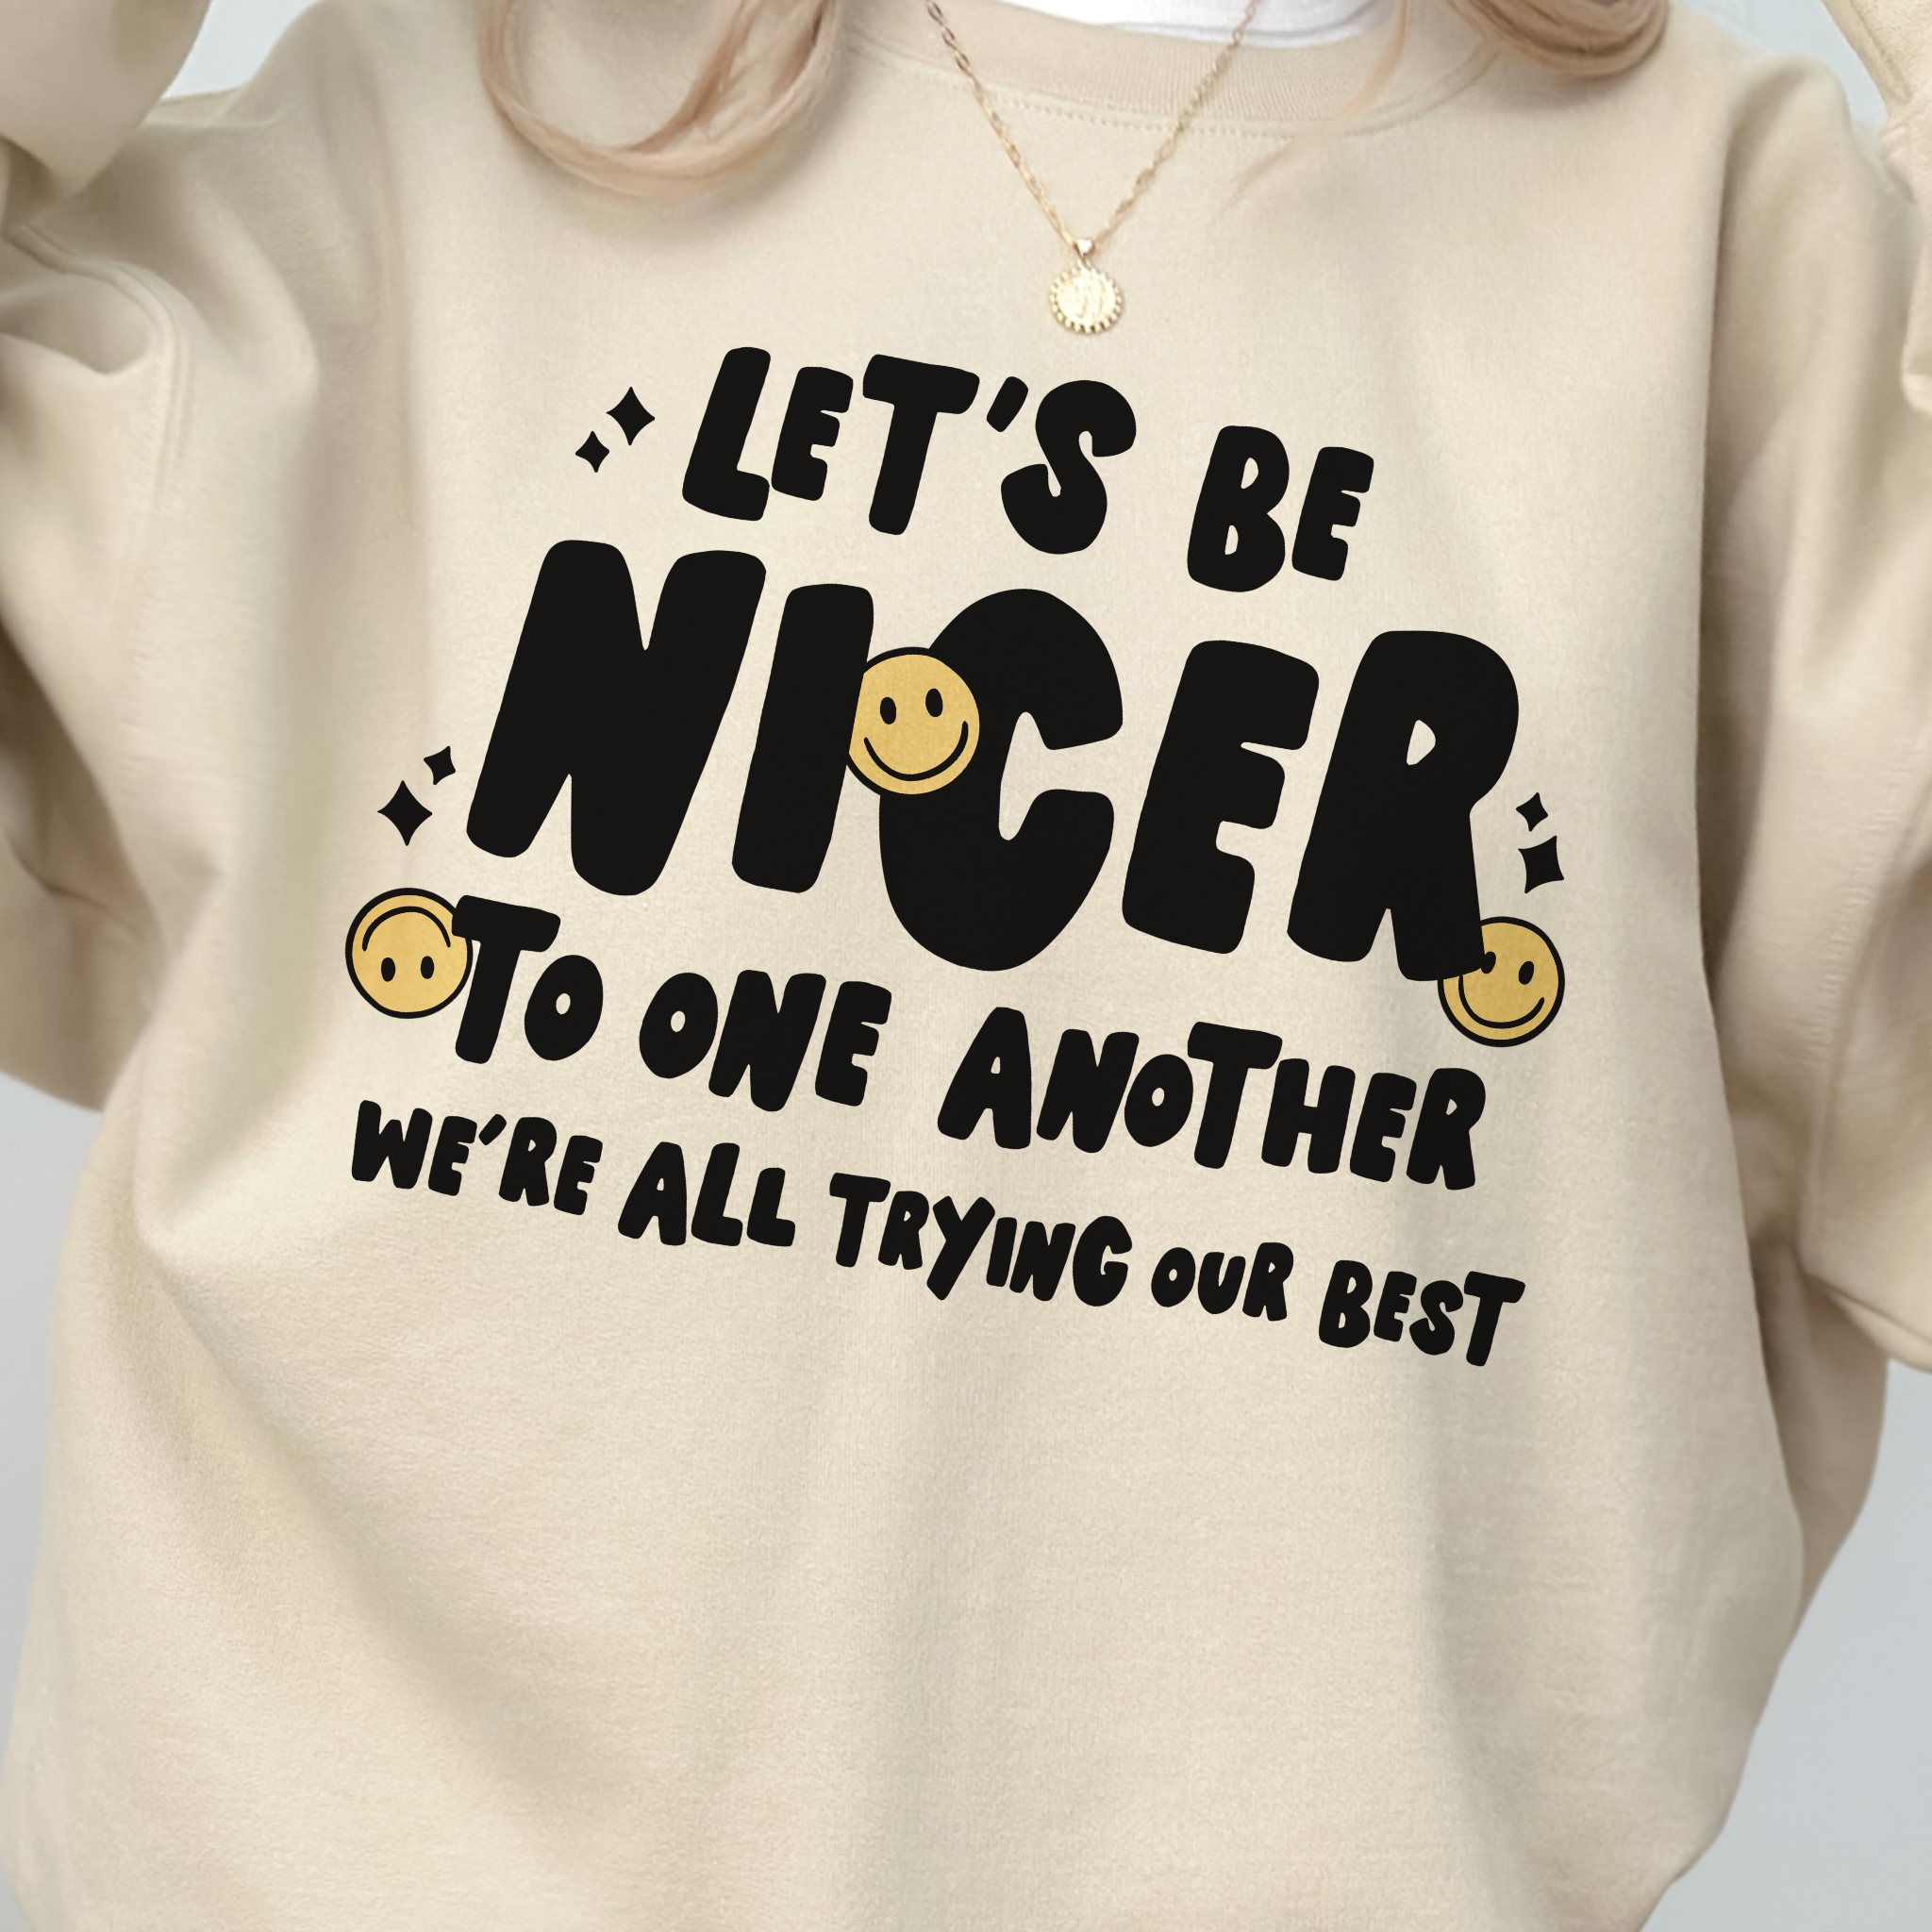 Let’s Be Nicer to One Another, We’re All Trying Our Best Unisex Heavy Blend Crewneck Sweatshirt